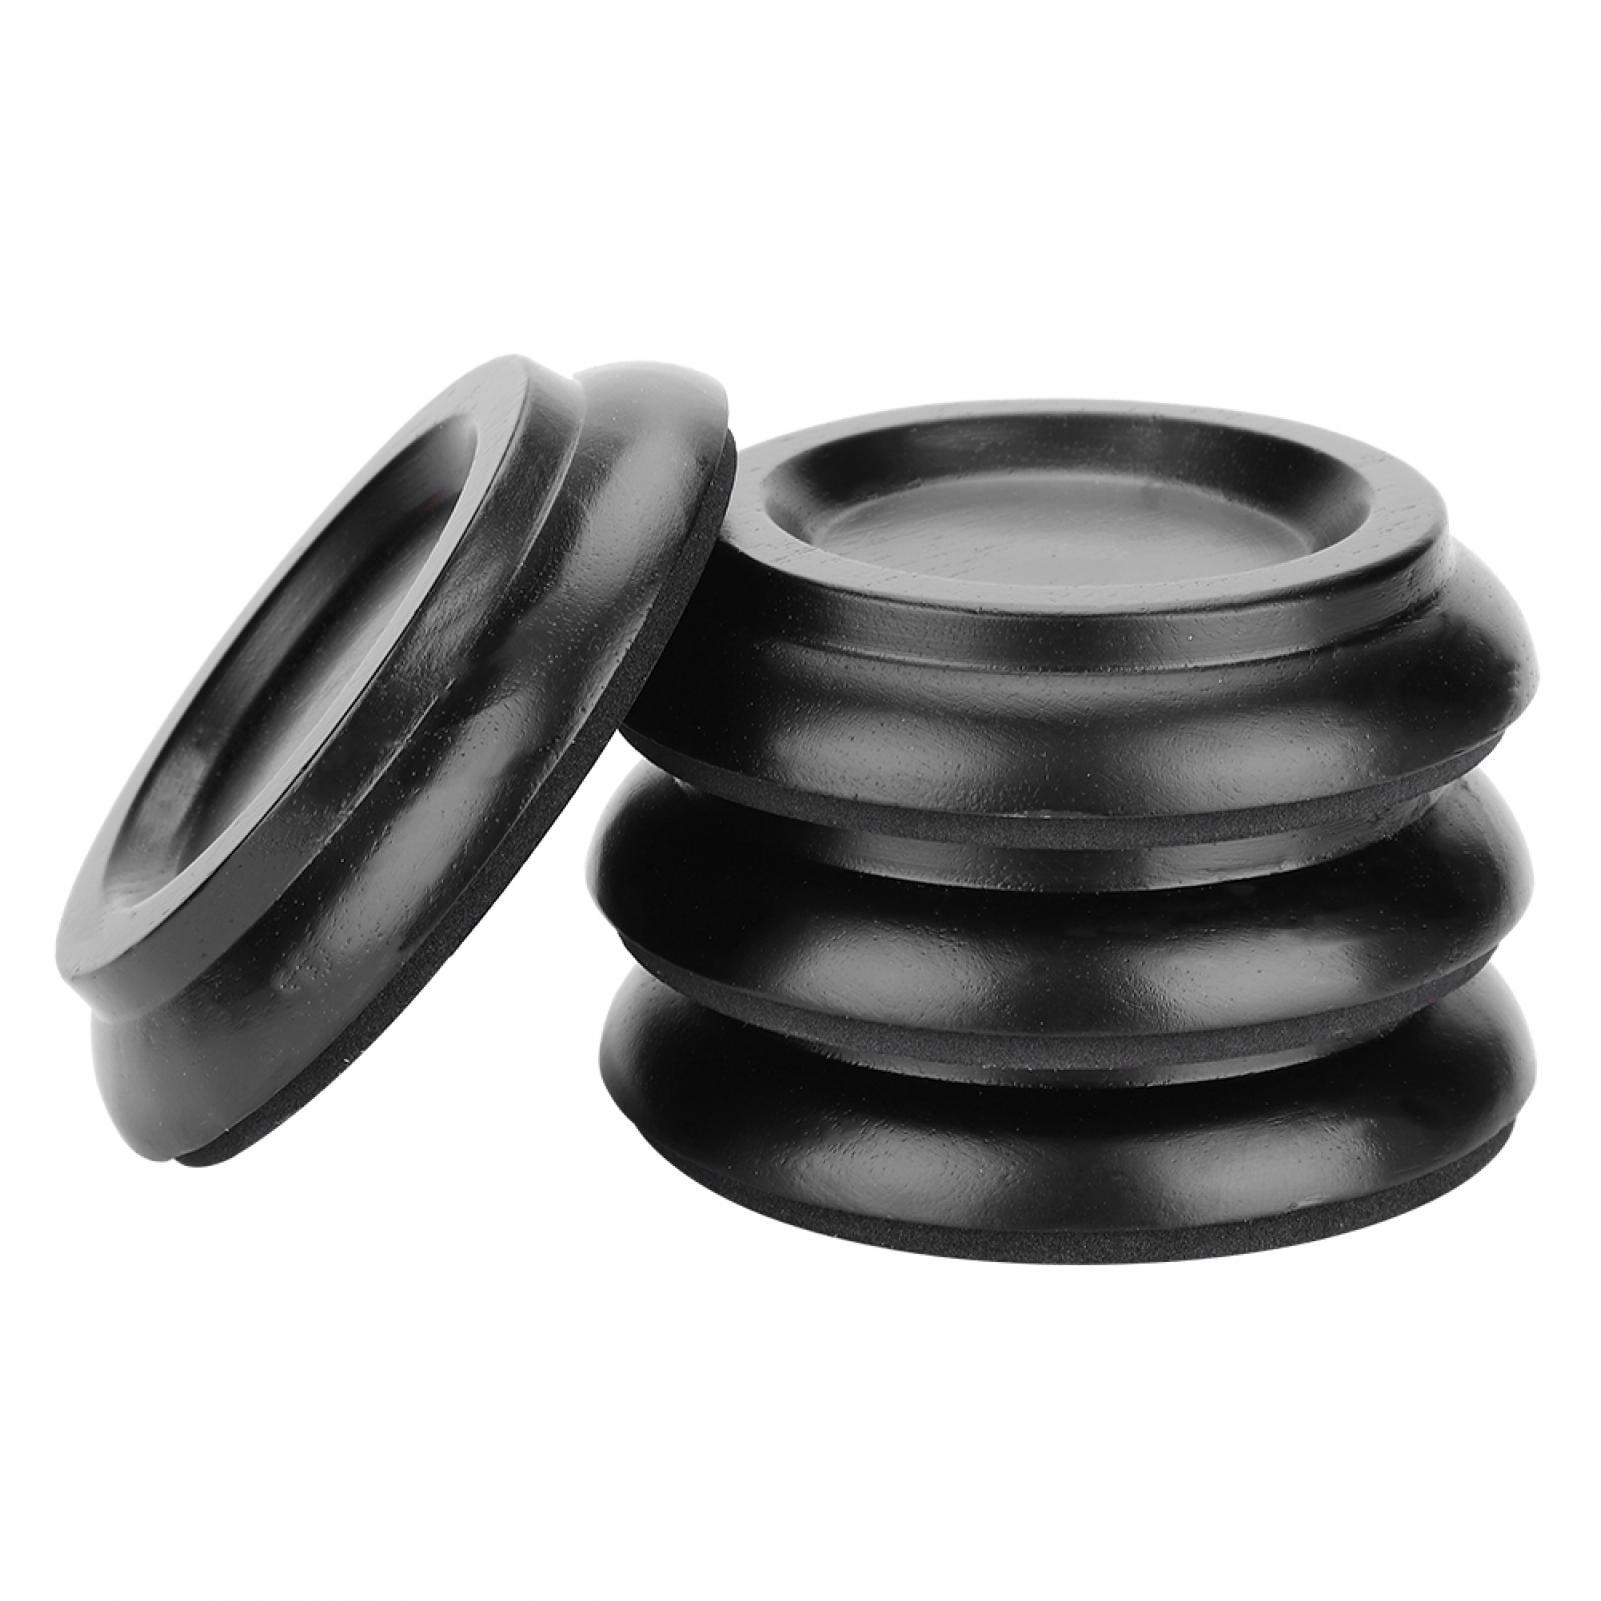 Piano Caster Piano Foot Pads Piano Accessories 3.9 in Cup Diameter for Protecting Piano and Floor 